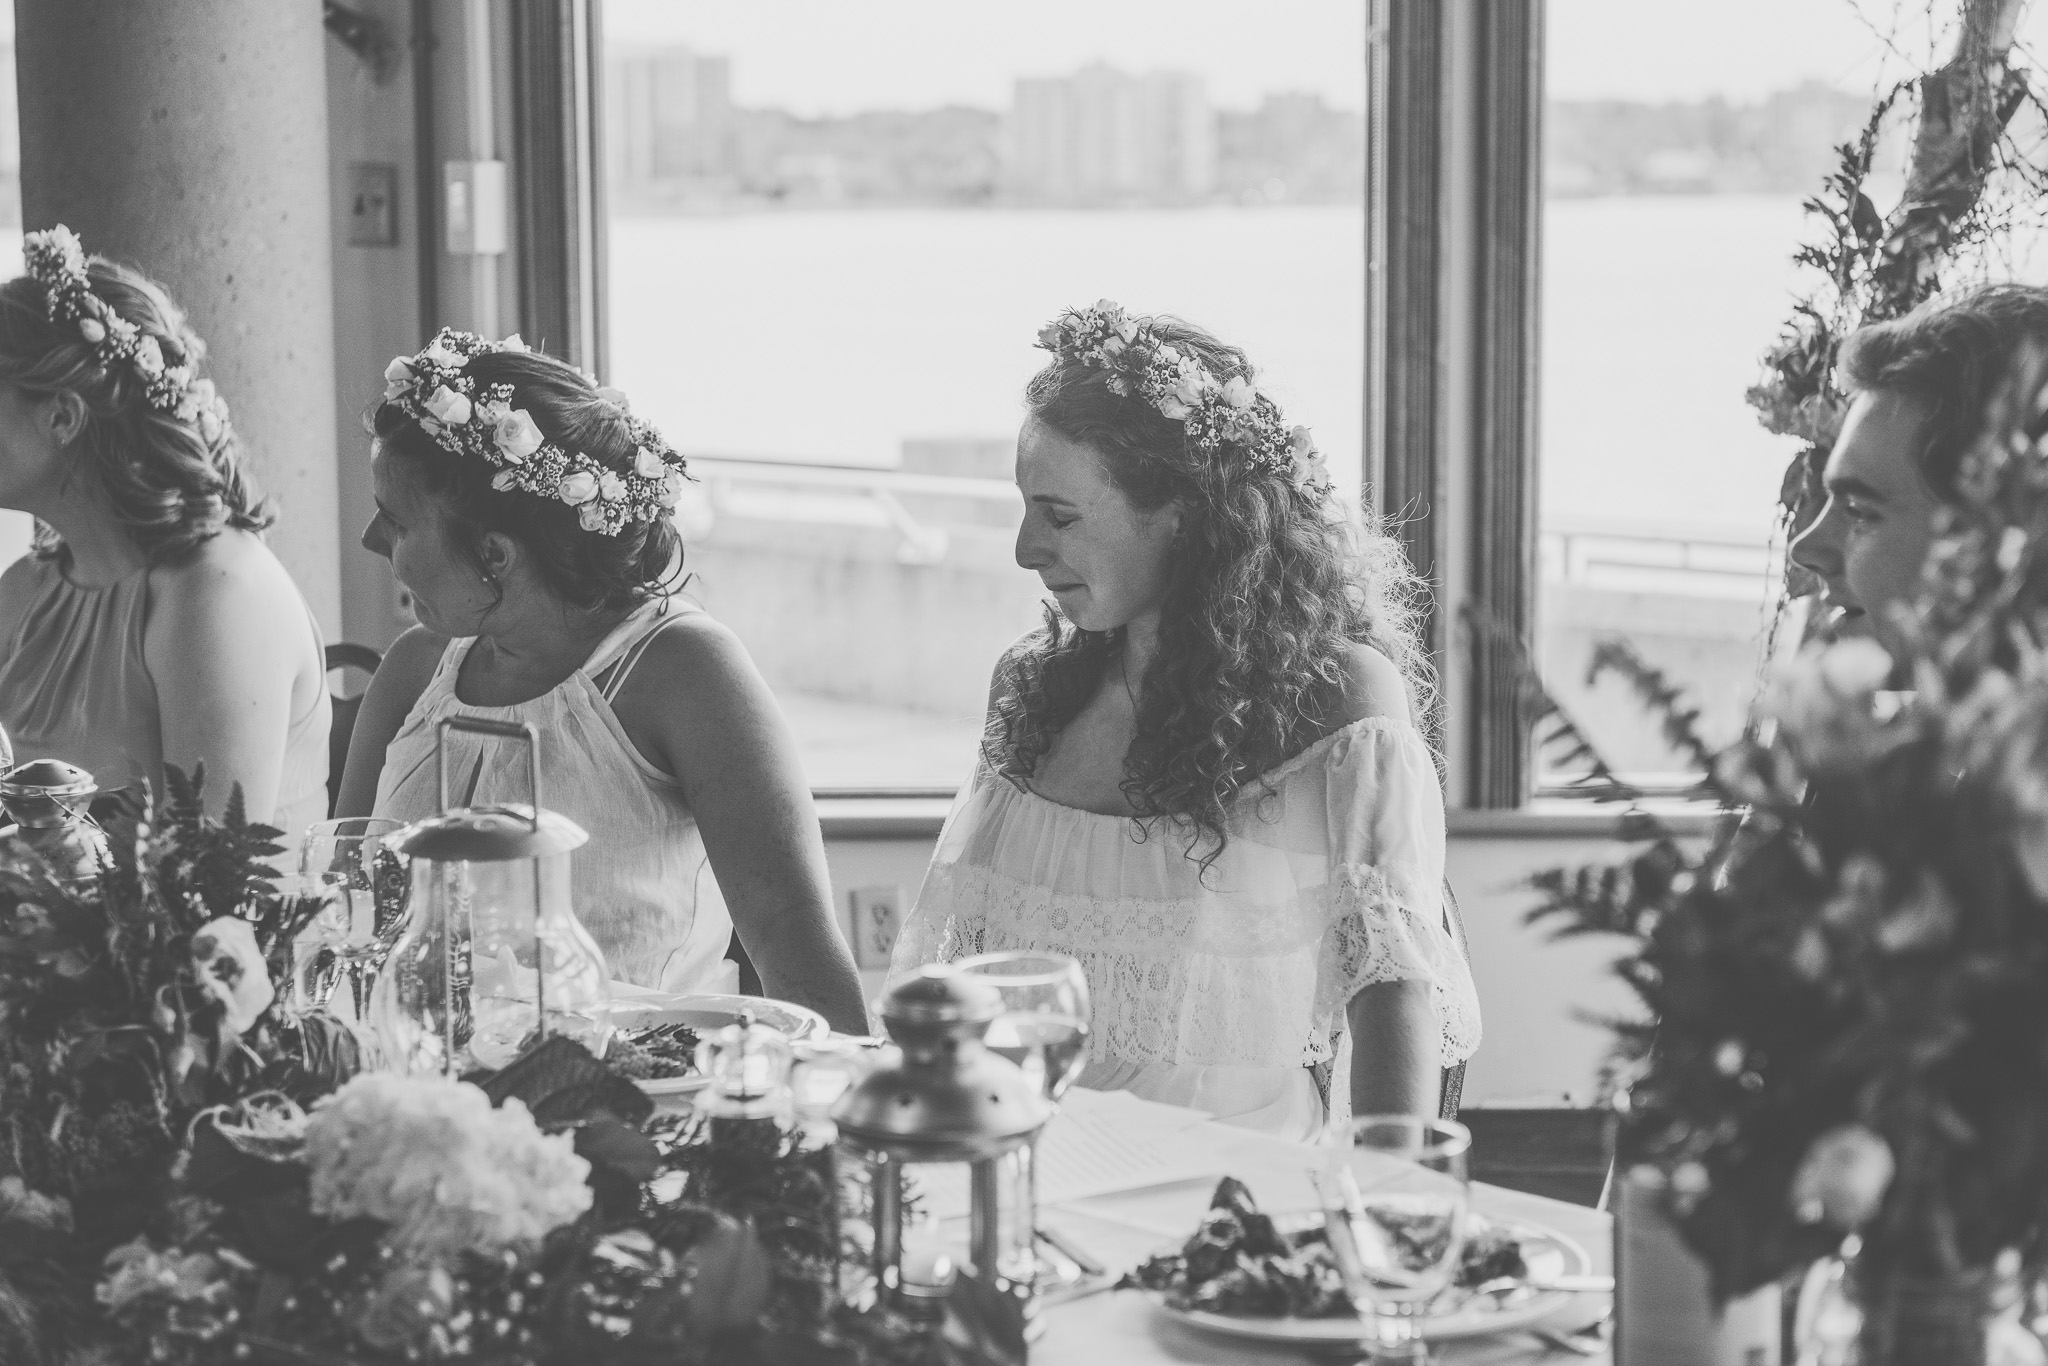 wedding, barrie wedding, barrie photographer, toronto photographer, barrie wedding photographer, toronto wedding photographer, jeannette breward photography, church, church wedding, waterfront, waterfront wedding, spring wedding, ontario wedding, couple, floral crown, religious ceremony, boho bride, boho wedding, bohemian wedding, floral crown, emotional, emotions, emotional wedding, black and white, ceremony, bridesmaids, wedding party, woods, forest, woods wedding, forest wedding, southshore centre, southshore community centre, barrie southshore community centre, barrie southshore centre, reception, party, dance, decor, details, flowers, floral